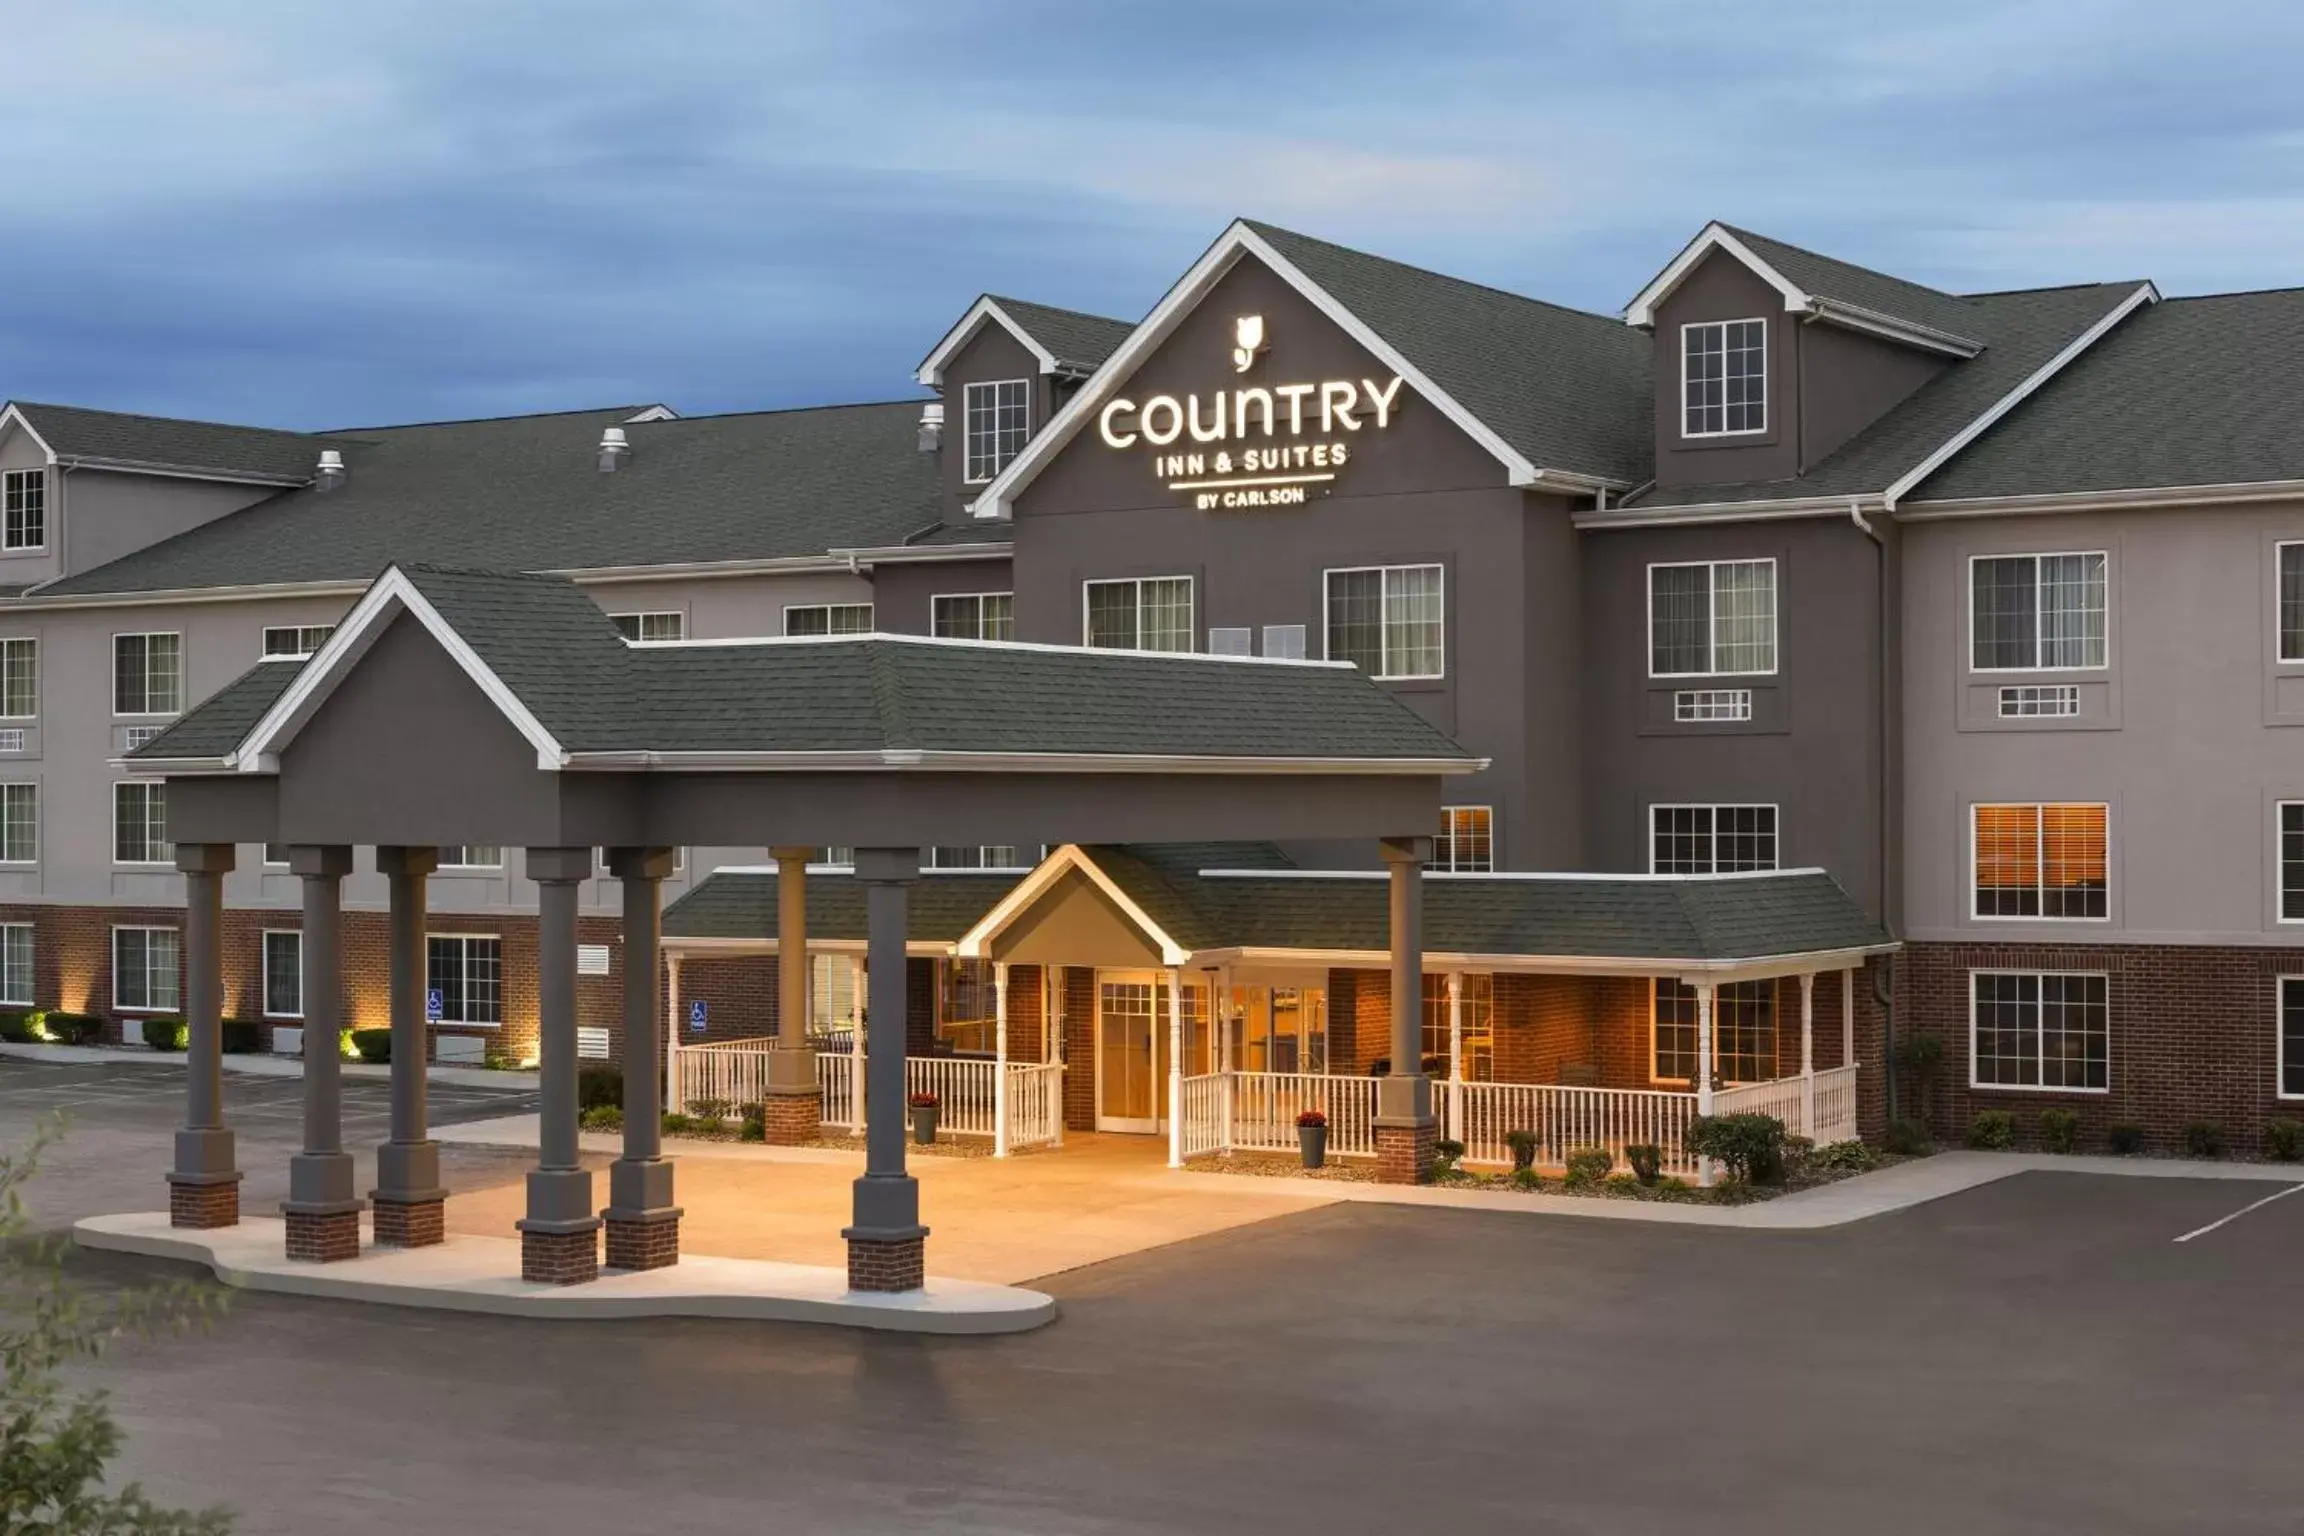 Street view, Property Building in Country Inn & Suites by Radisson London, Kentucky